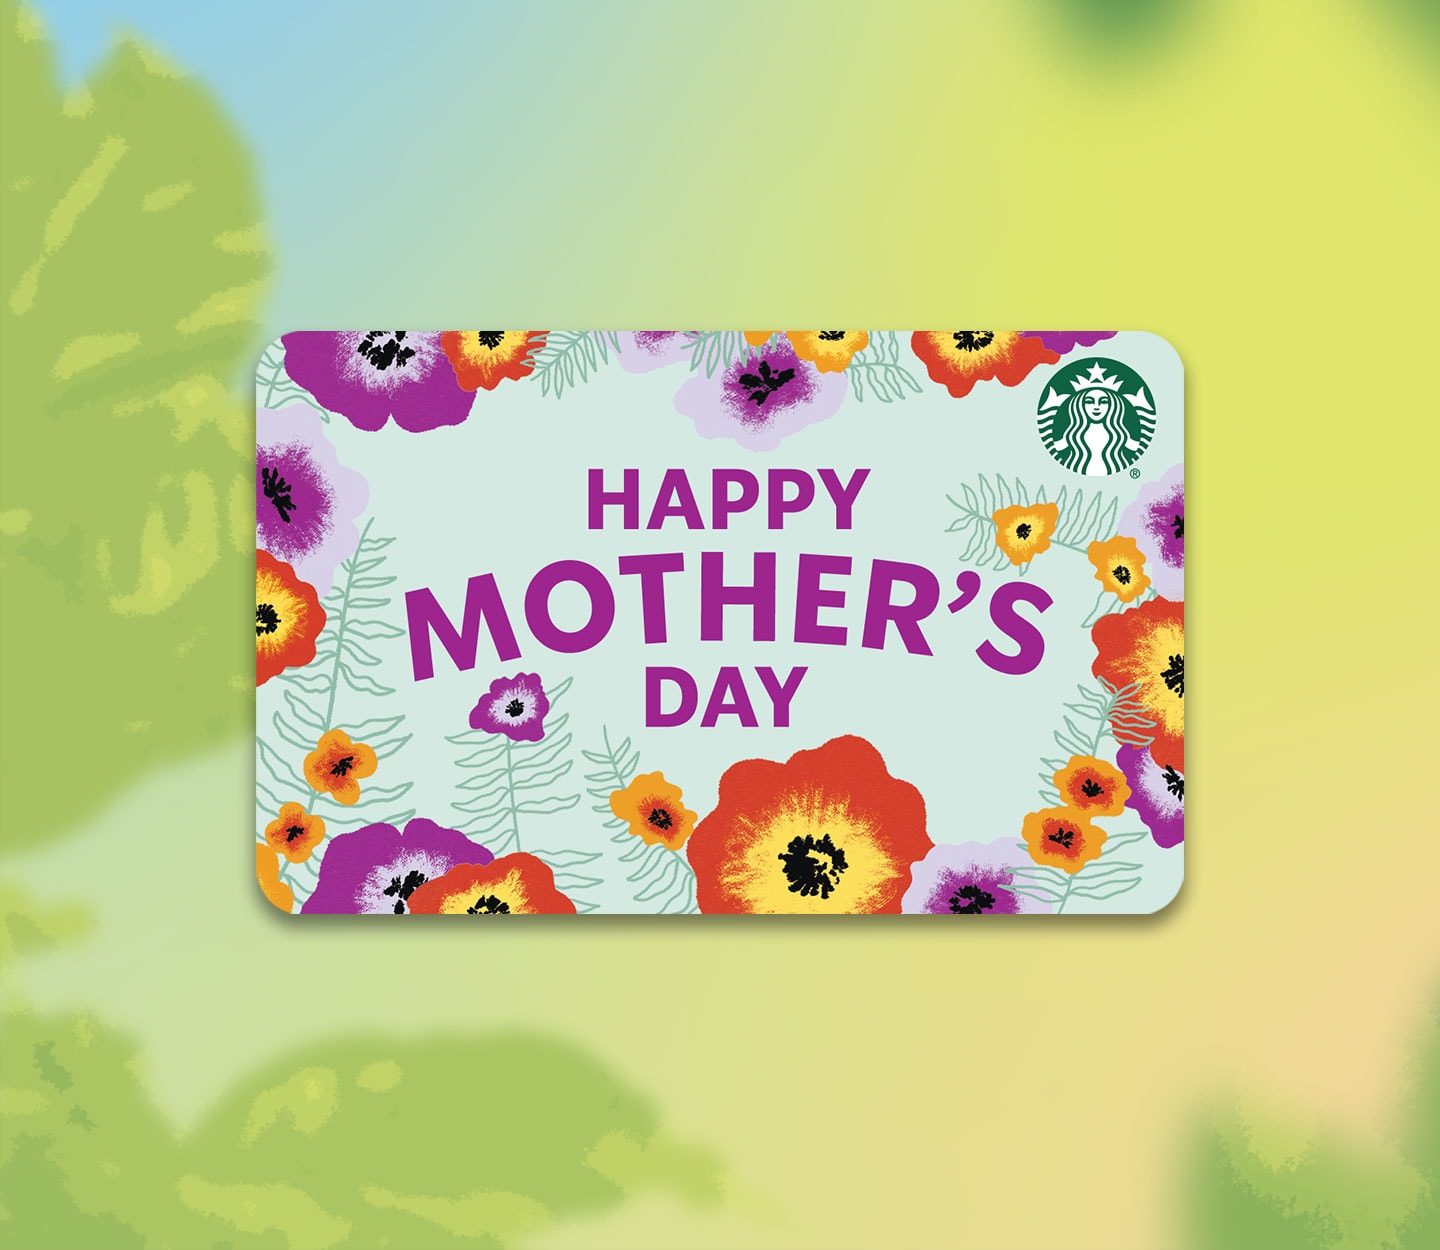 A Starbucks gift card illustrated with flowers around the perimeter that says, “Happy Mother’s Day”